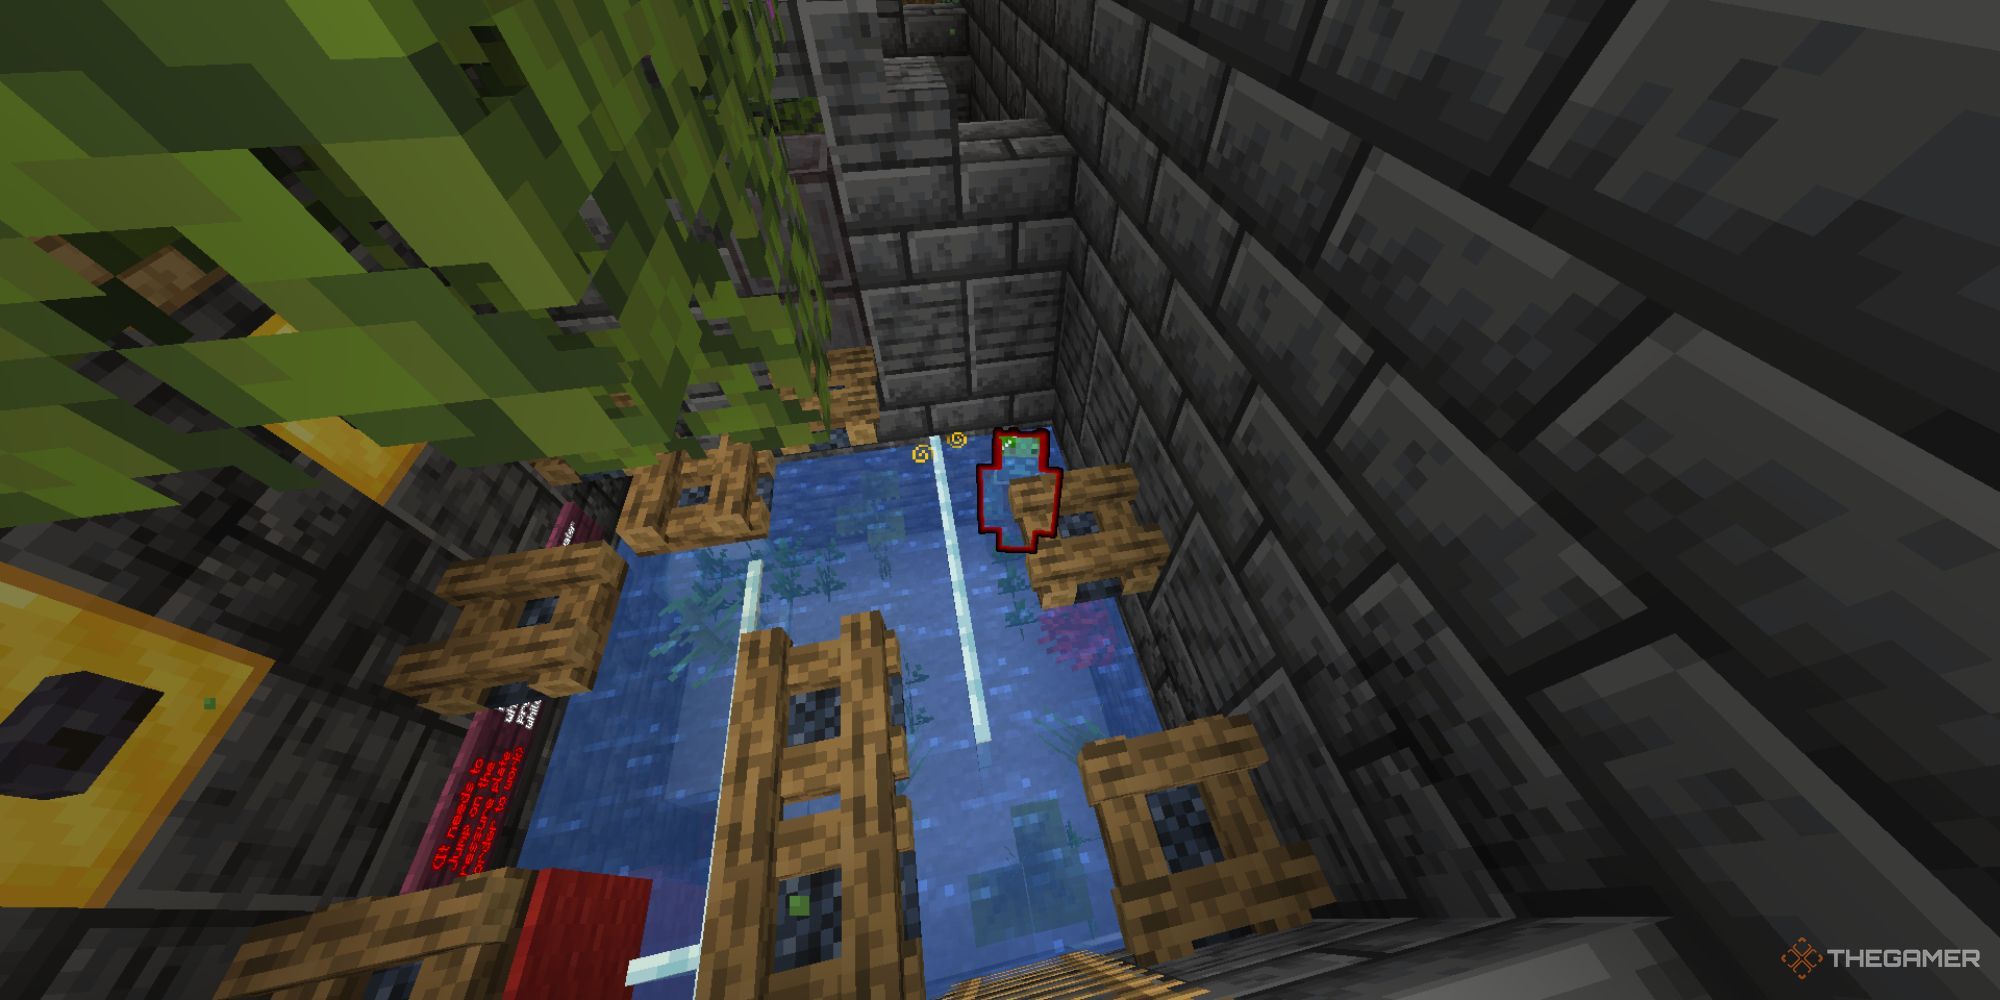 A Drowned mob with a red outline seen below the player in a waterlogged puzzle room.